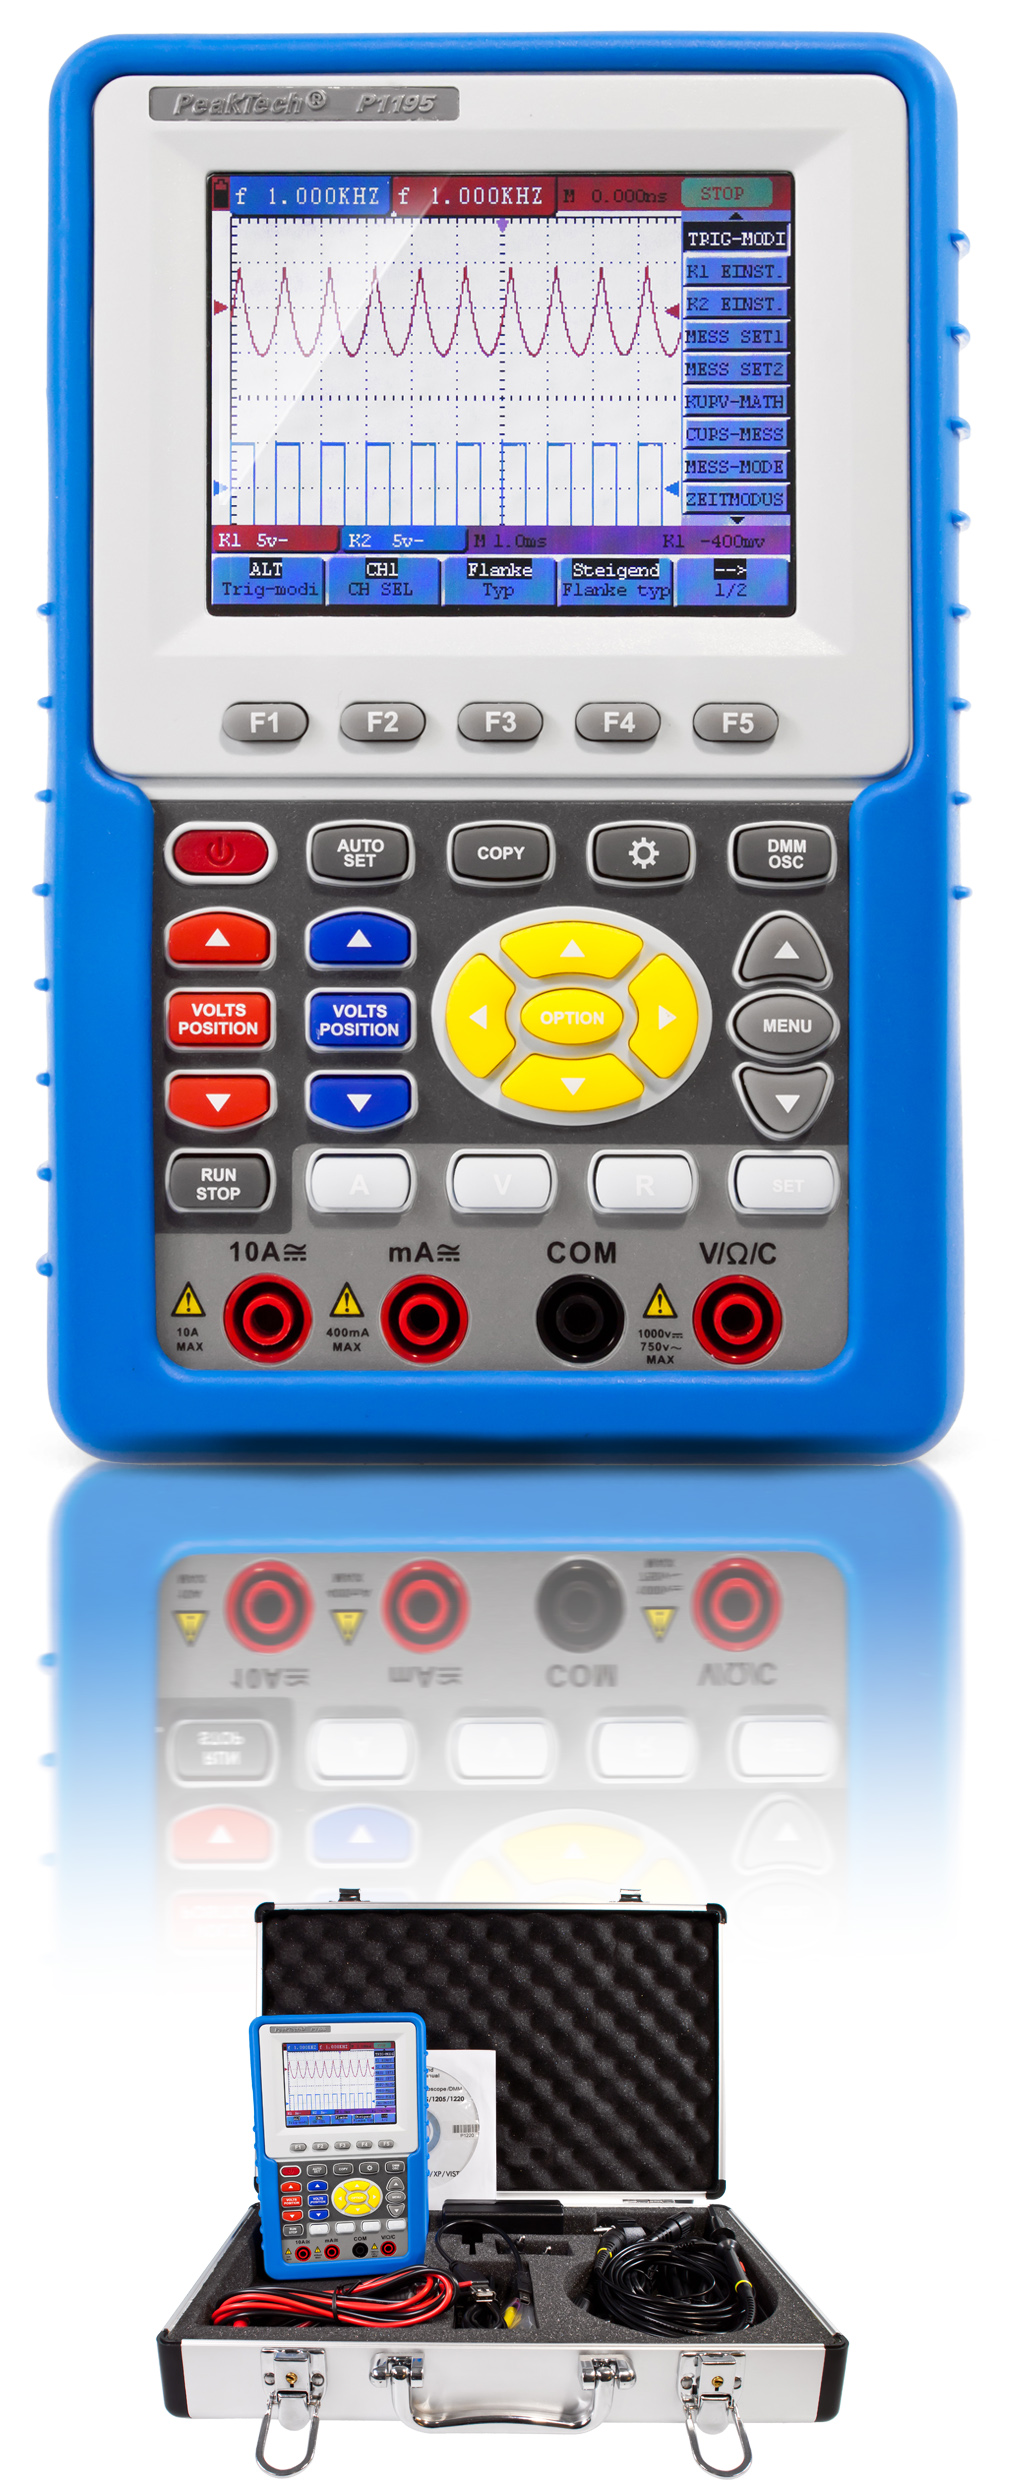 «PeakTech® P 1195» 100 MHz / 2 CH, 1 GS/s handheld oscilloscope